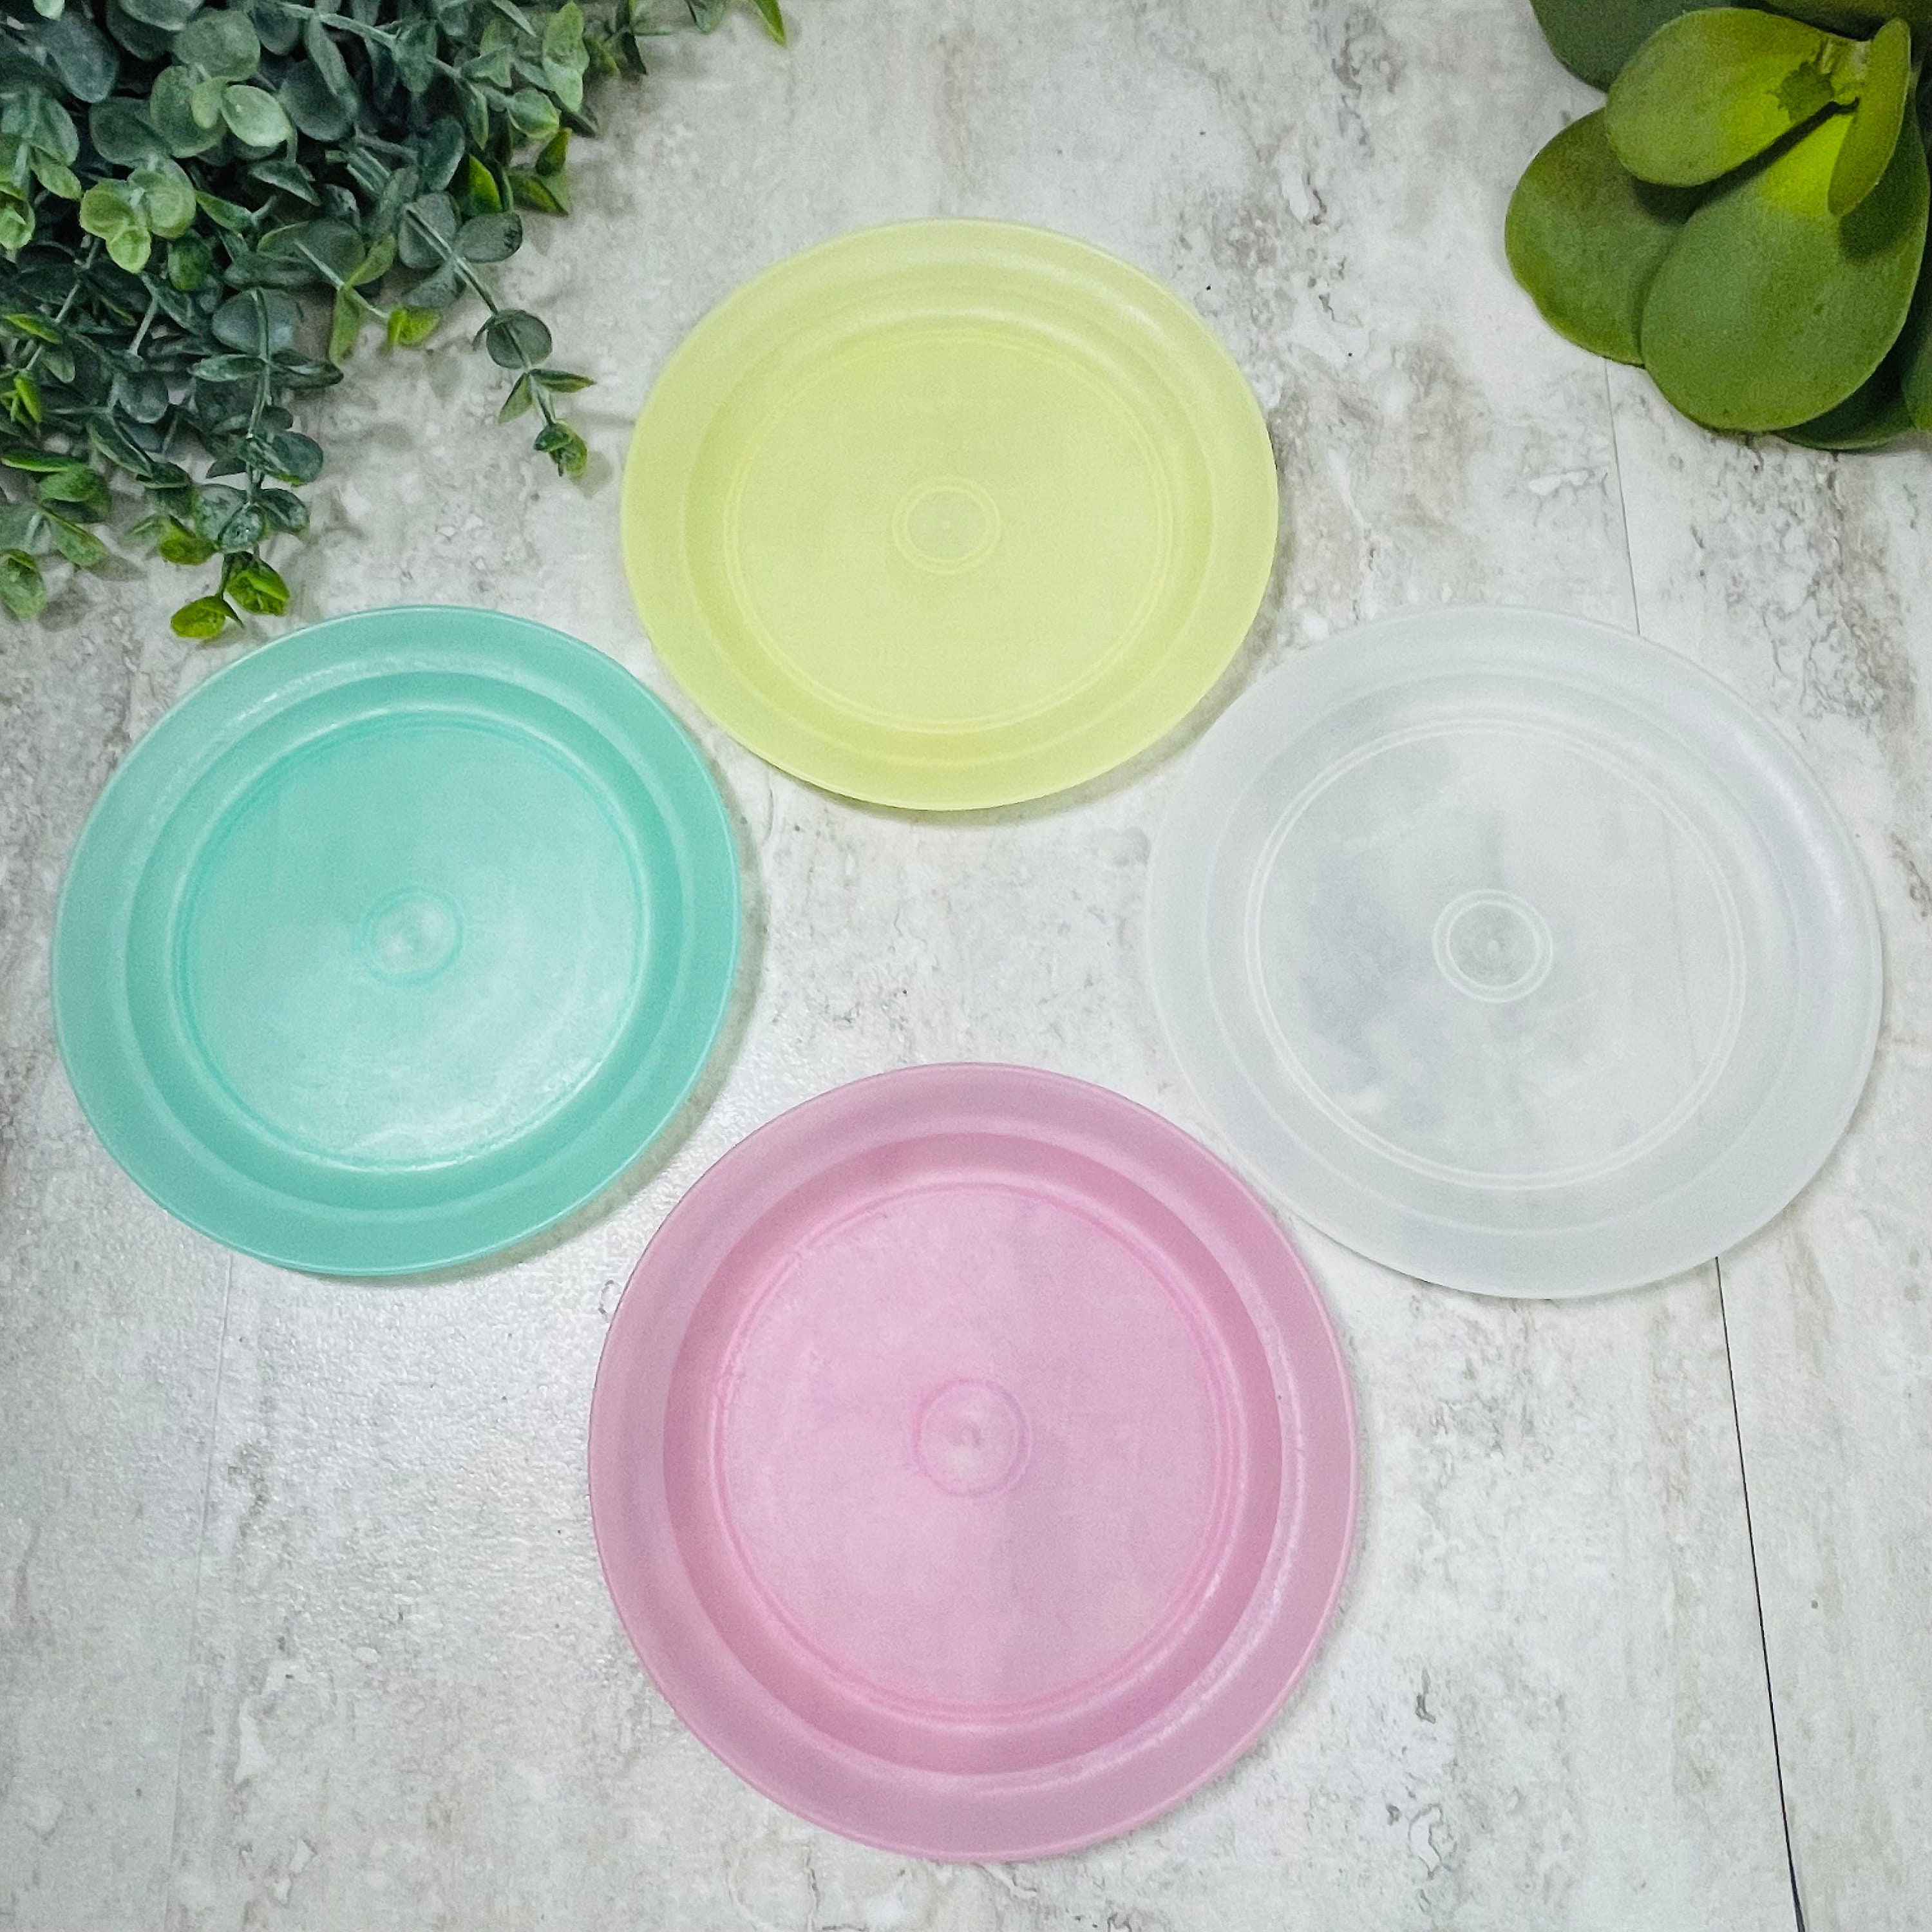 Tupperware Crystal Wave Microwave Bowls Set of 3 2645, 2646 With Lids 227  White Bowls, Yellow or Sheer Lids 2.5 C, 1.75c 